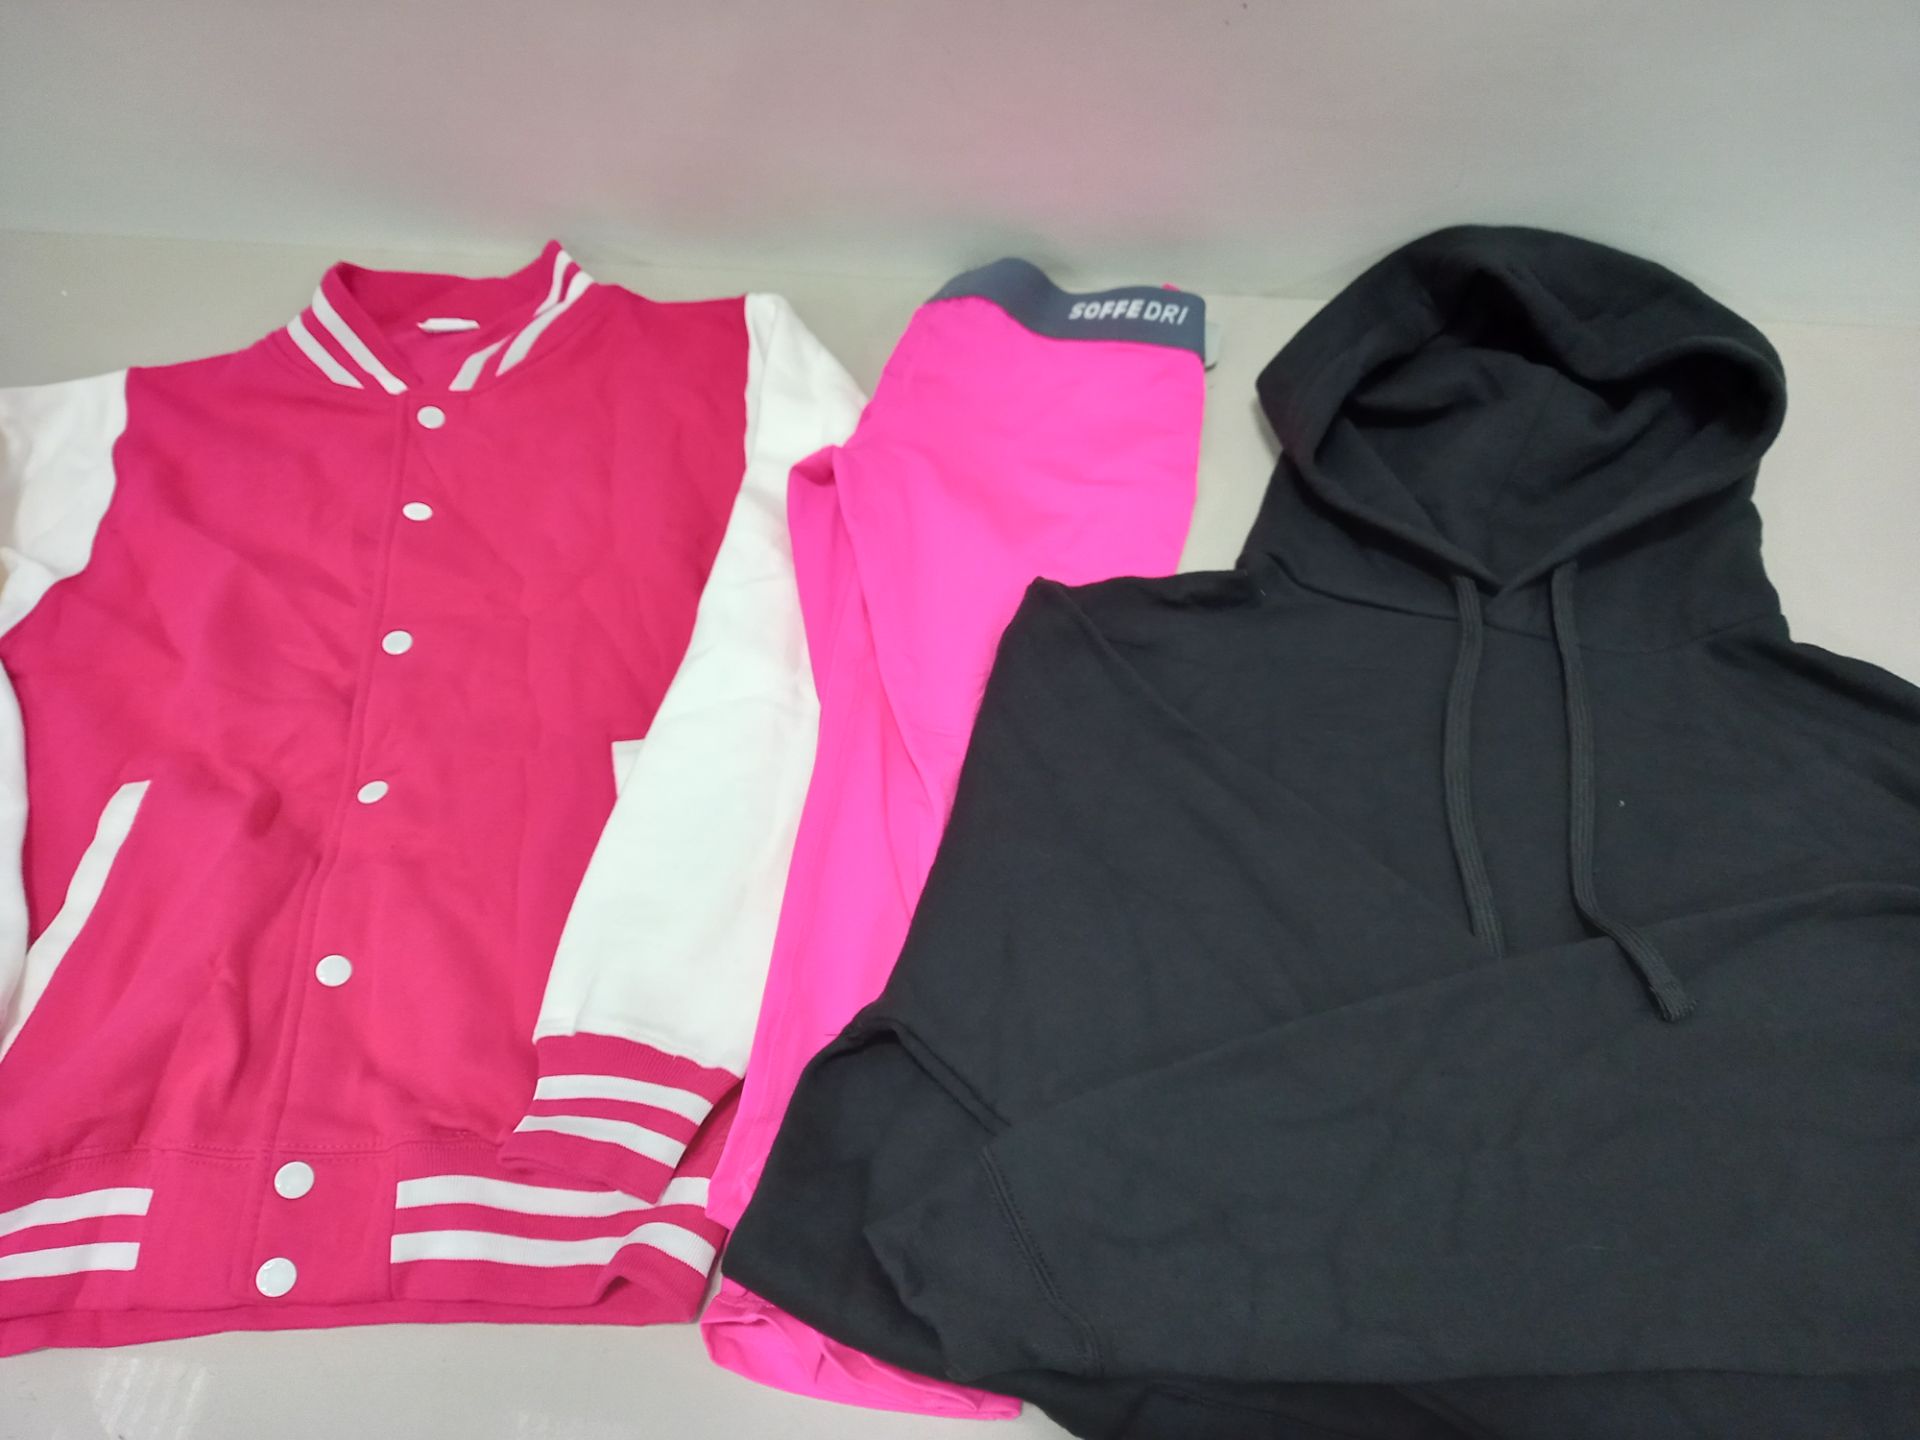 5 TRAYS (NOT INCLUDED) OF VARIOUS ITEMS OF CLOTHING IE BLACK JUMPERS, PINK 3/4 GYM LEGGINGS AND PINK